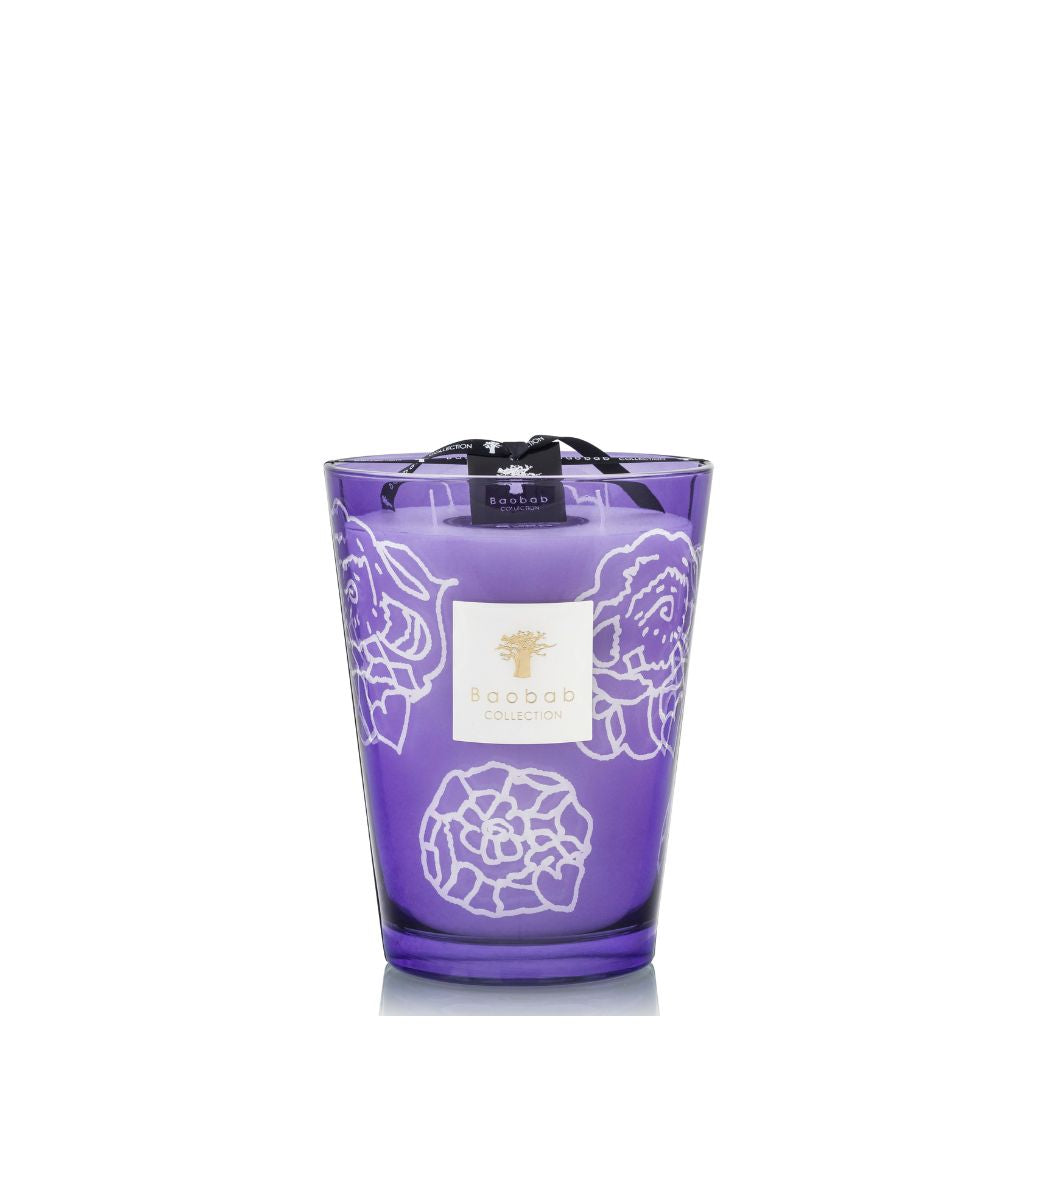 CANDLE COLLECTIBLE ROSES DARK PARMA